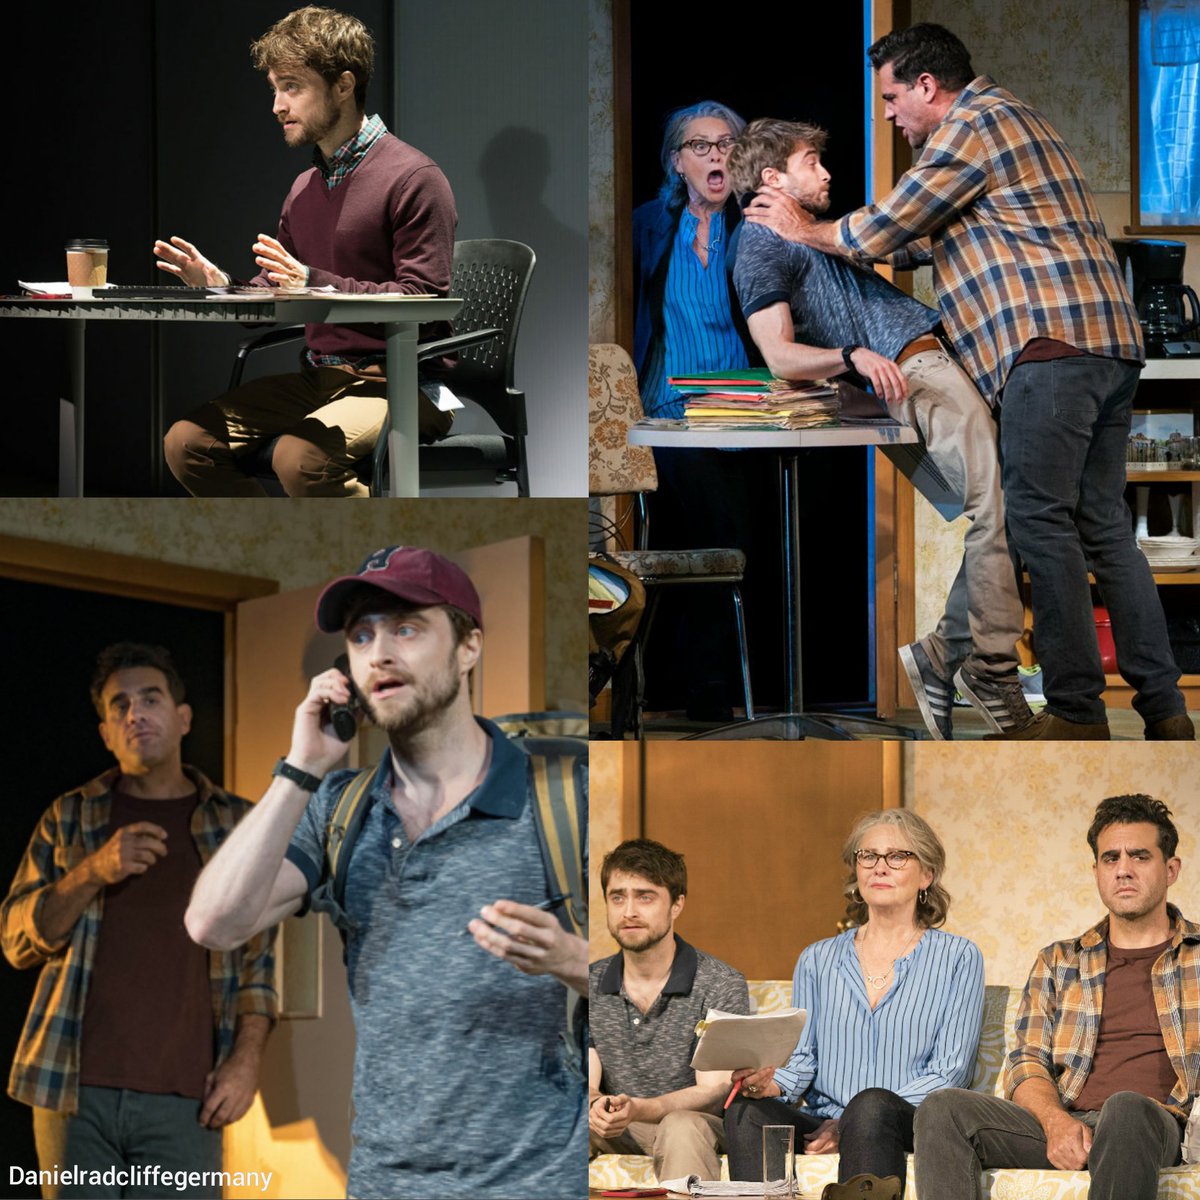 Loved that play❤ Wish i could see it again with this cast💜
#lifespanofafact #DanielRadcliffe #cherryjones #bobbycannavale